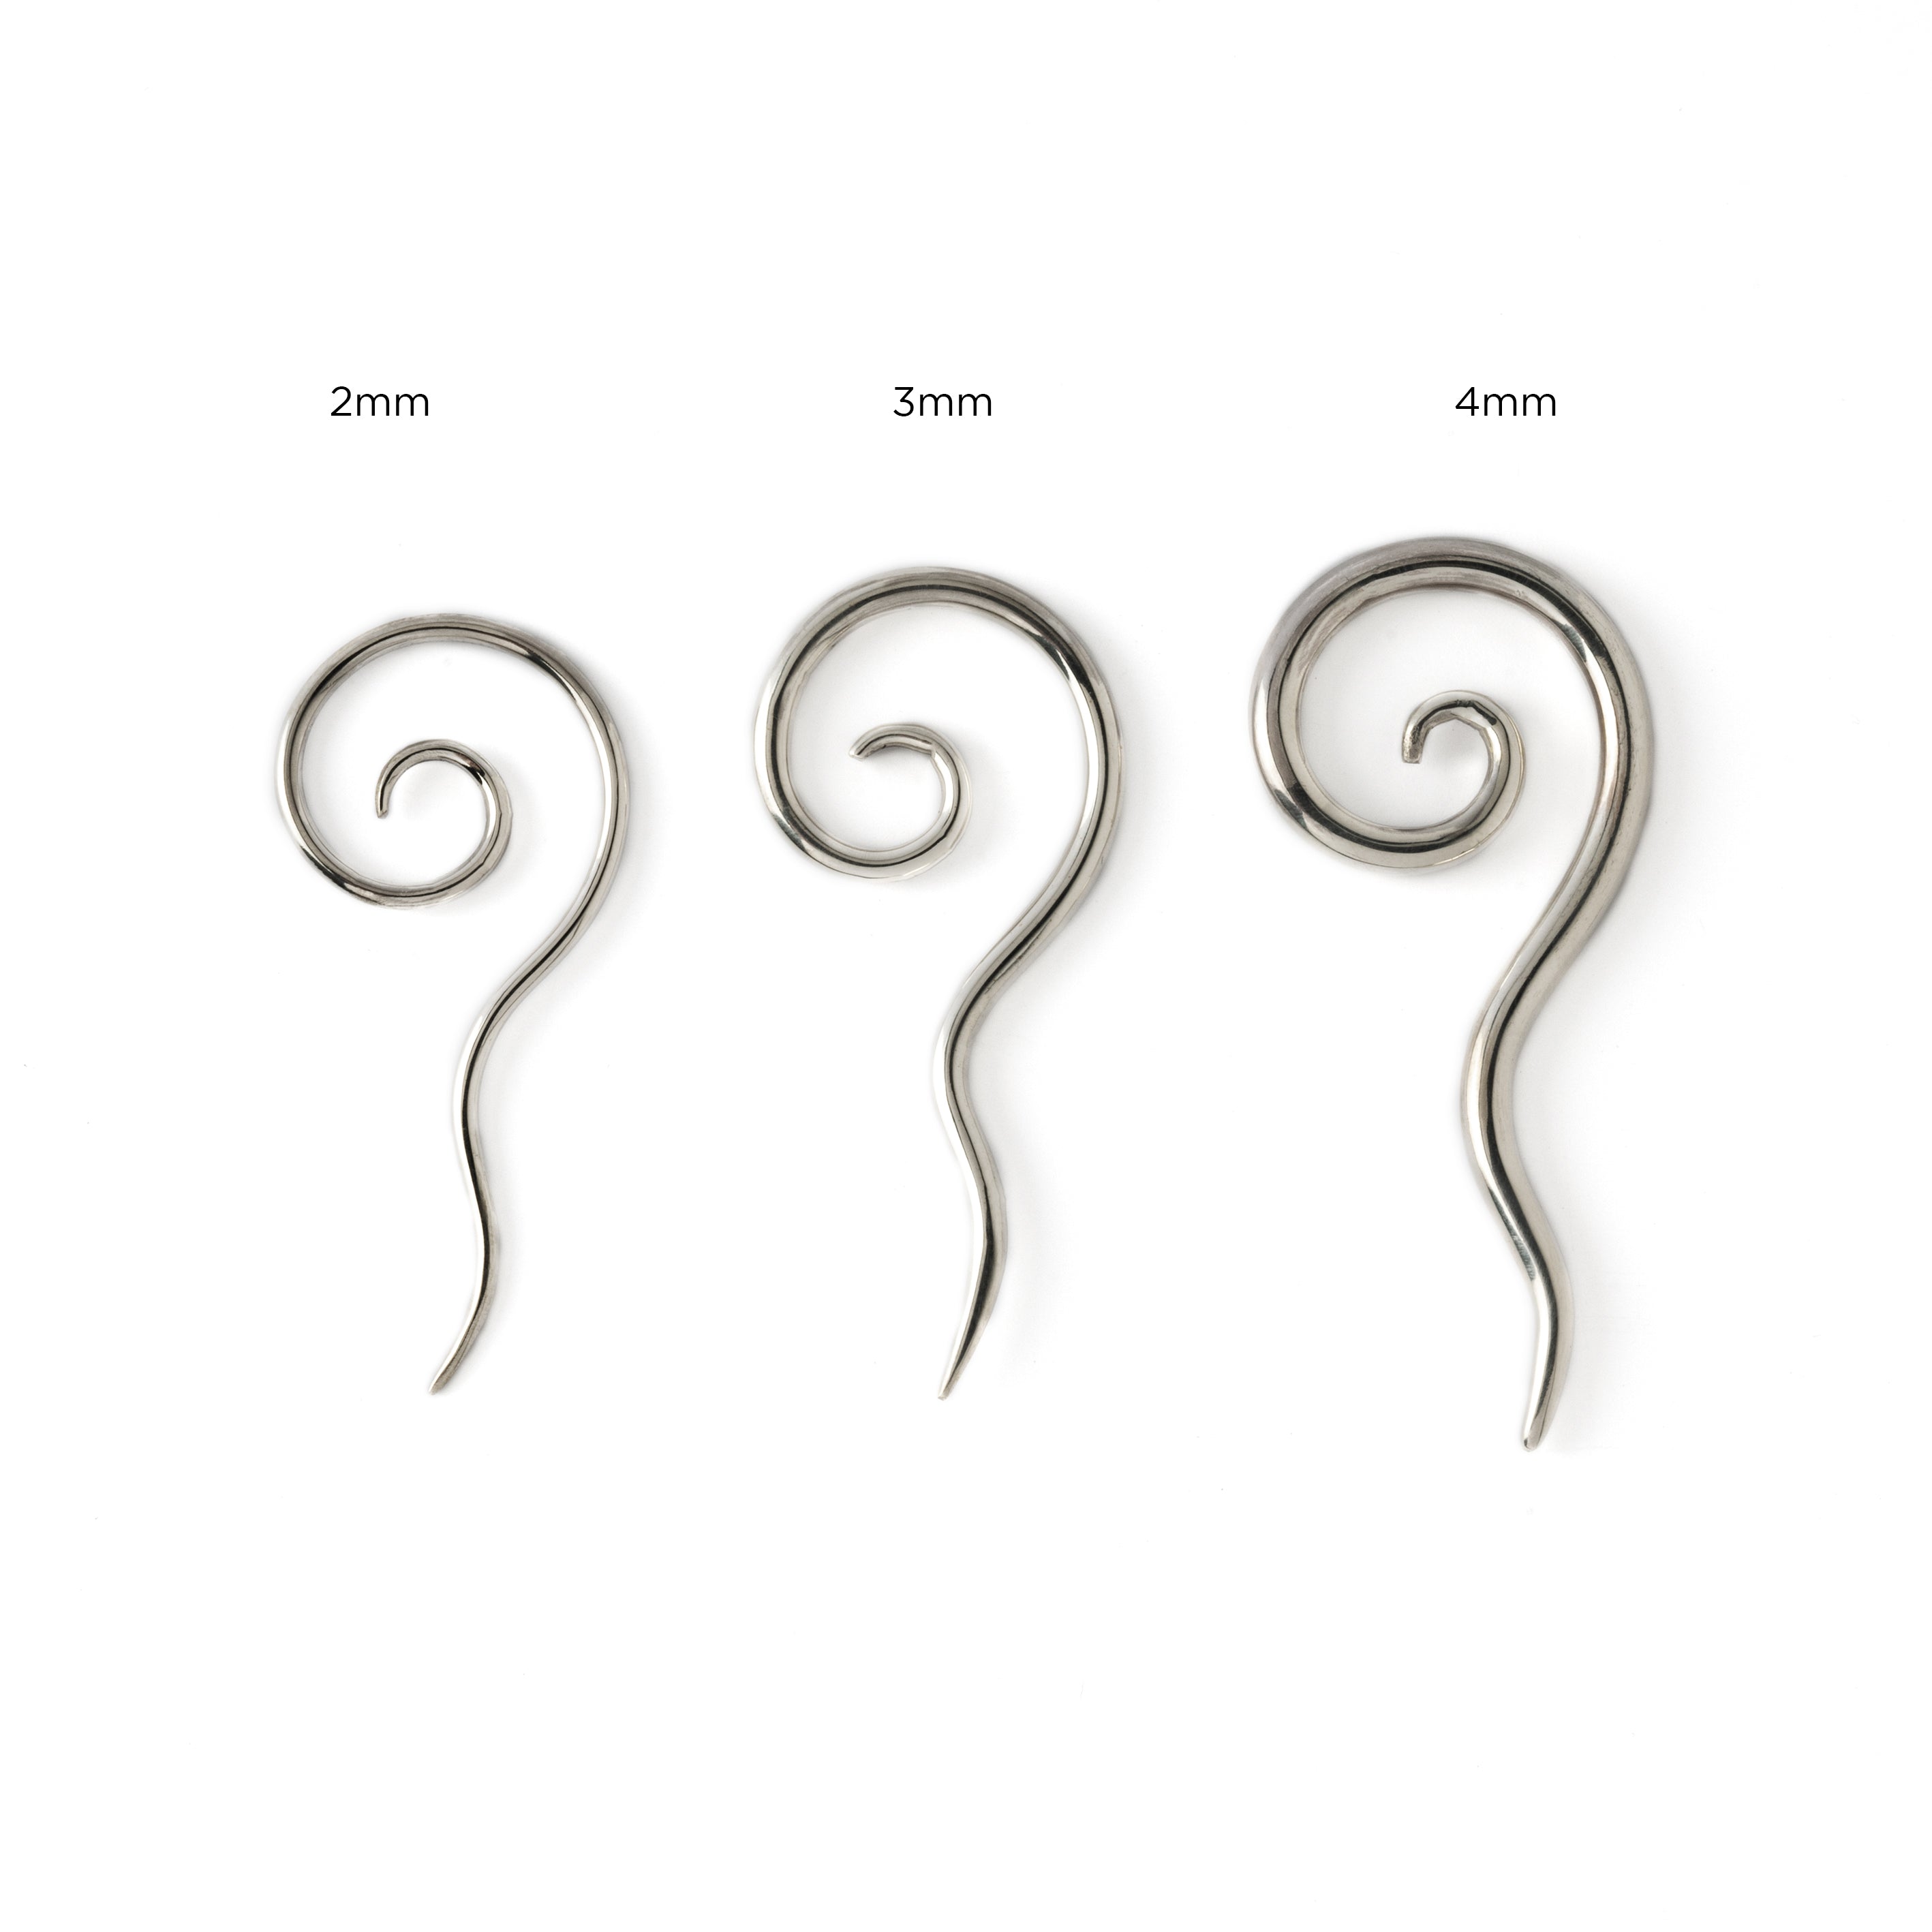 2MM, 3MM, 4MM SILVER LONG TAILED SPIRAL EAR STRETCHERS HANGER SIDE VIEW